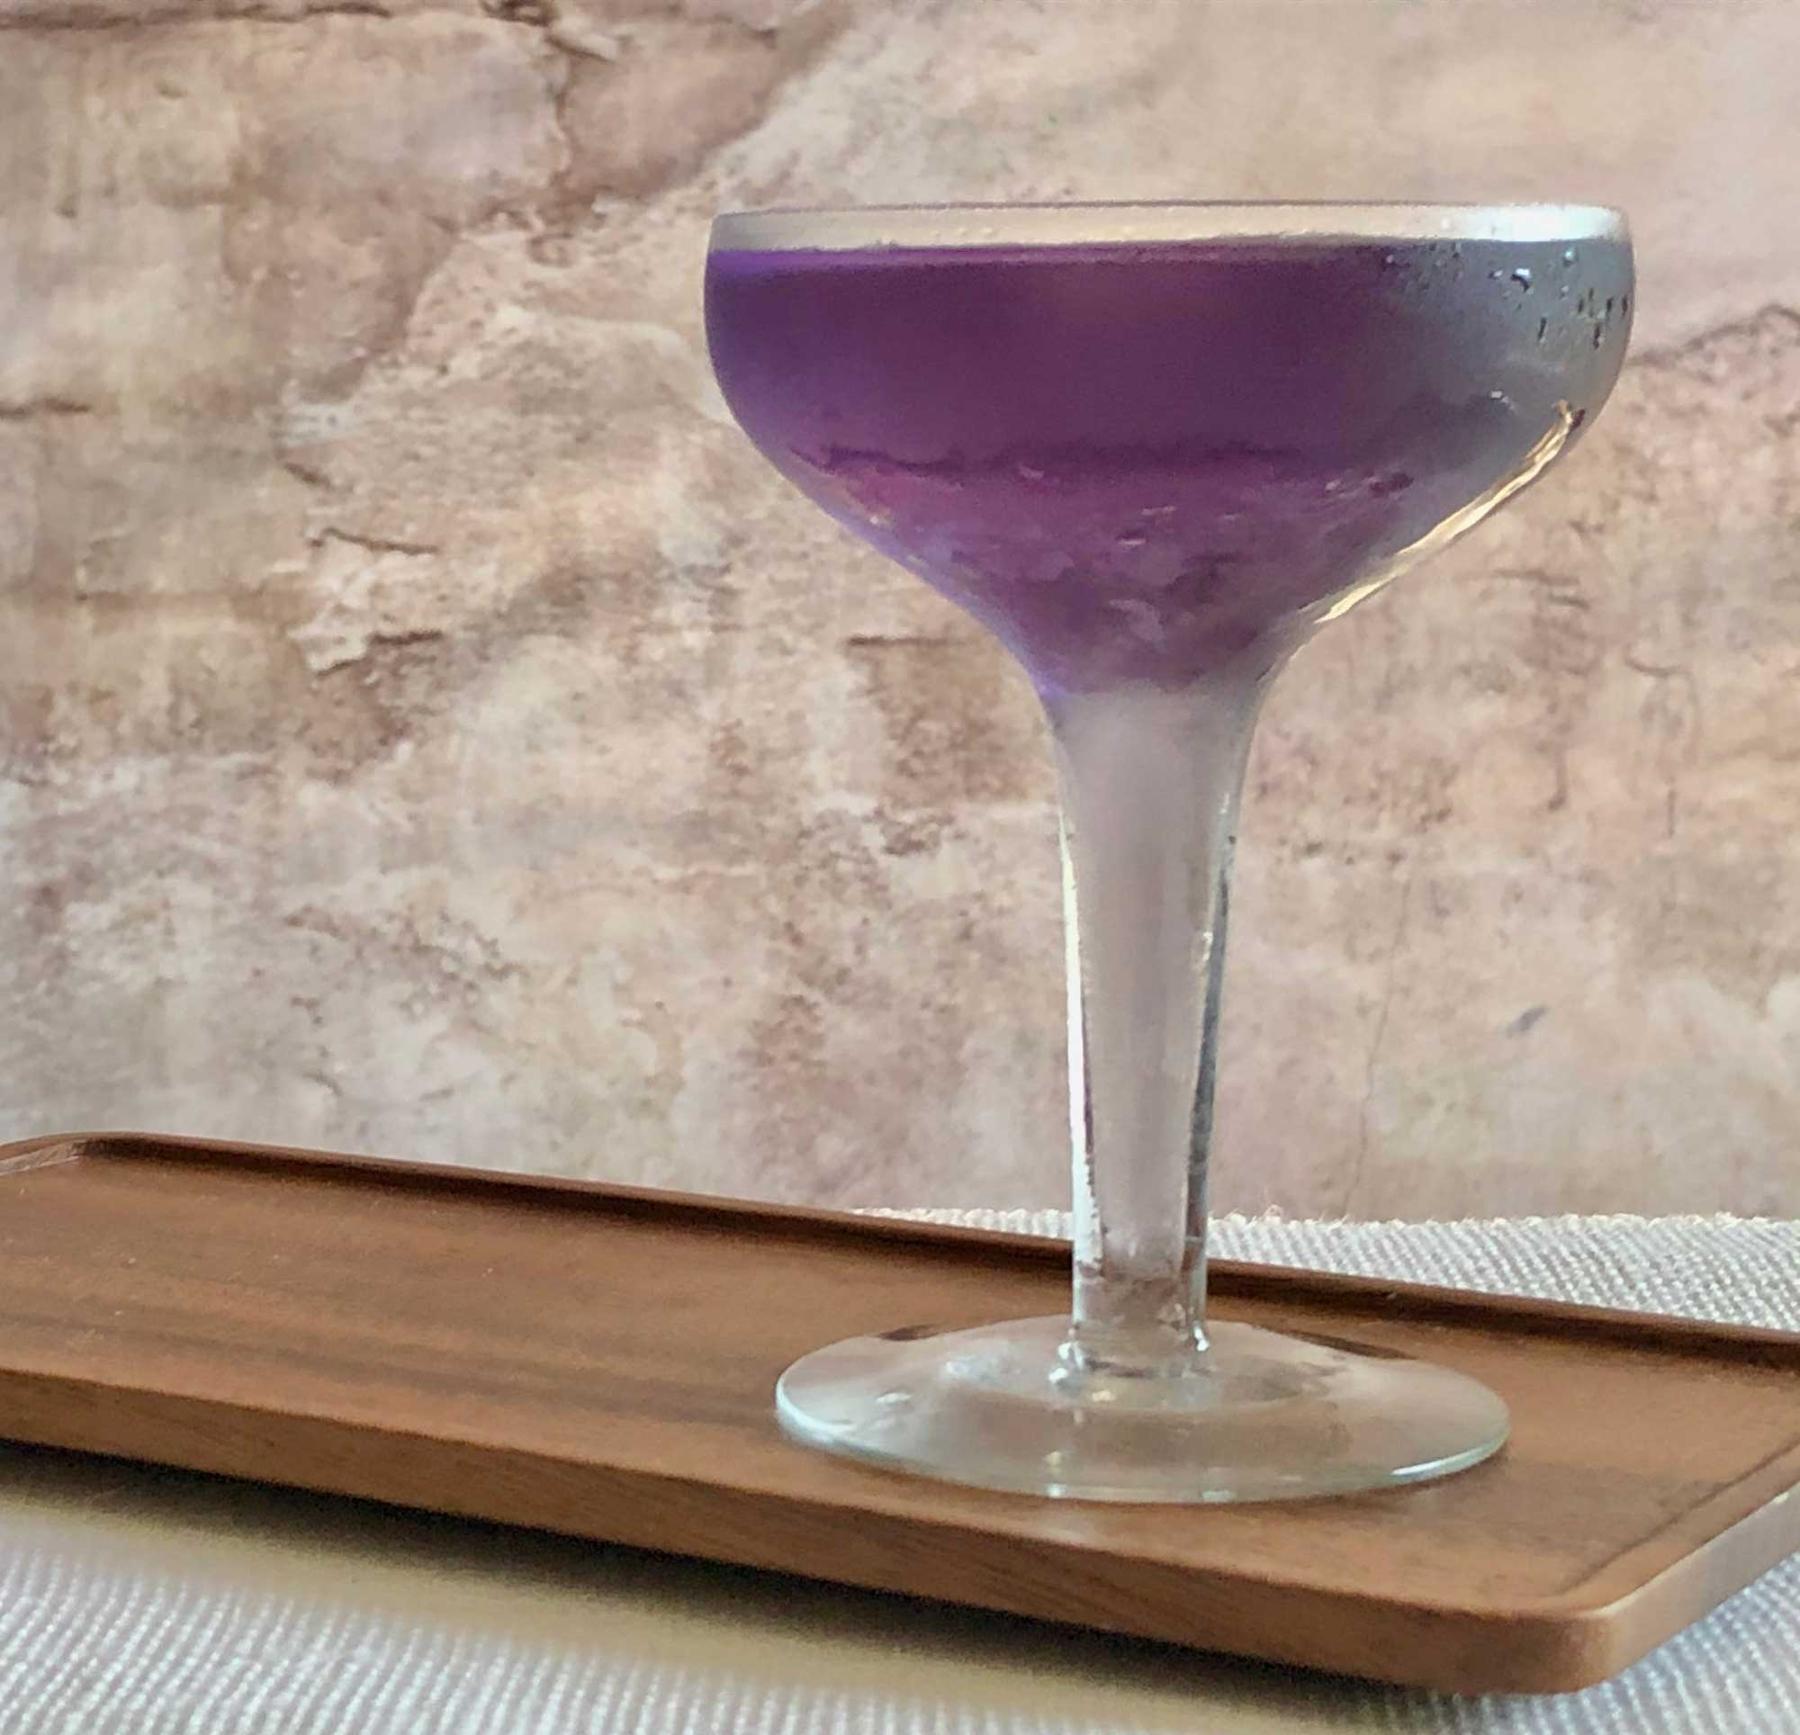 An example of the Night Flights, the mixed drink (drink), by Andra Johnson, Washington D.C., featuring Hayman’s London Dry Gin, vodka, Salers Gentian Apéritif, Rothman & Winter Crème de Violette, lemon twist, and maraschino cherry; photo by Lee Edwards